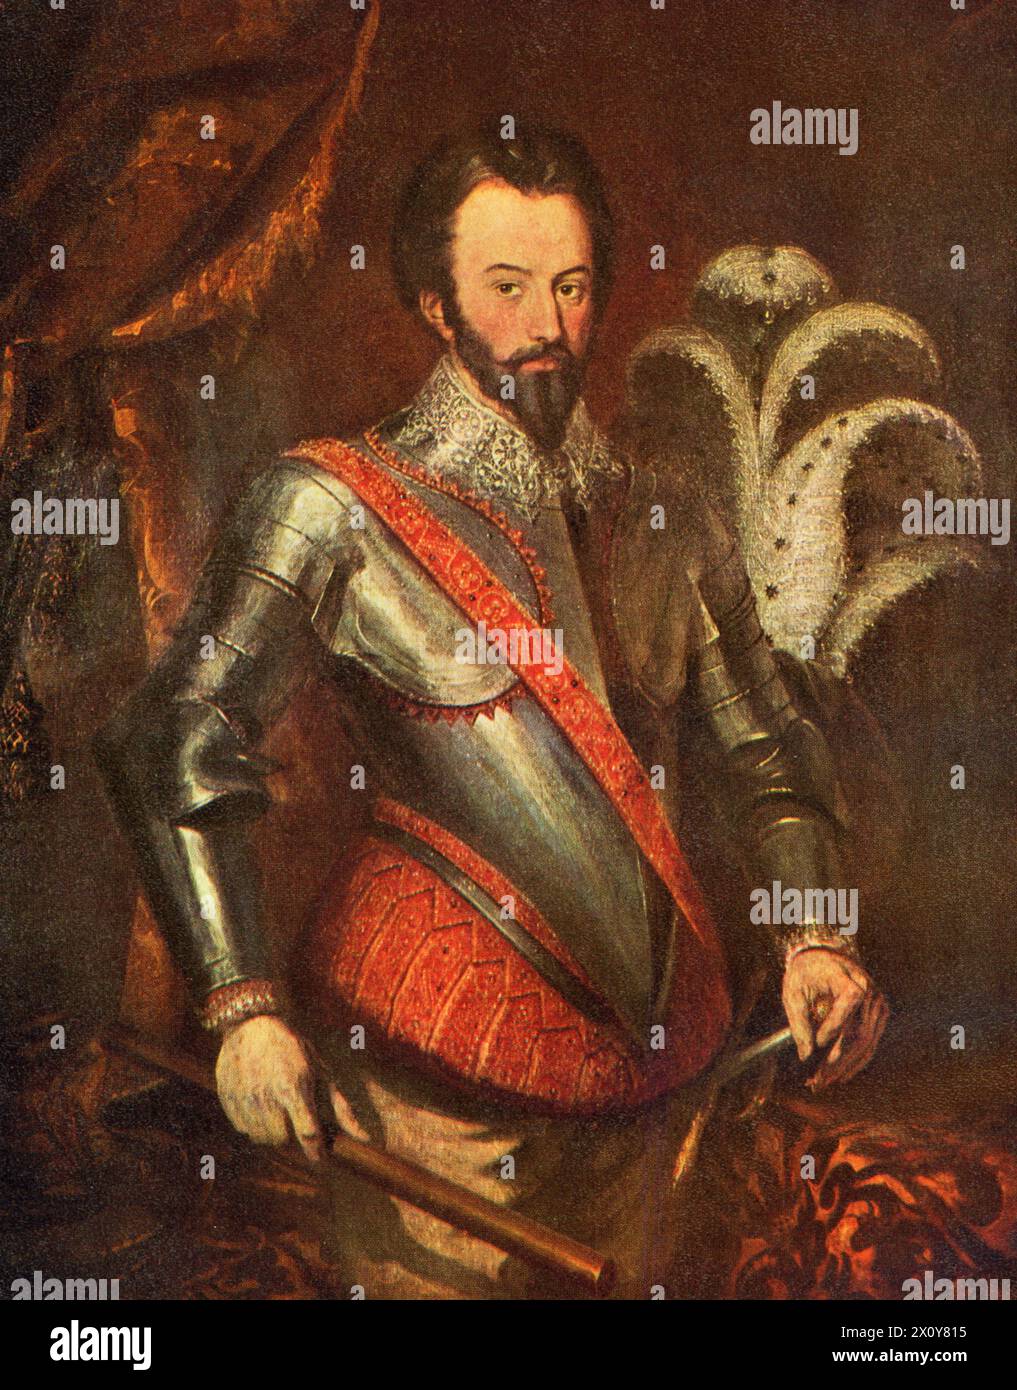 Sir Walter Raleigh (c1552-1618), 19th century. By Herbert Luther Smith (1809-1870). Raleigh was an English statesman, soldier, writer and explorer. Stock Photo